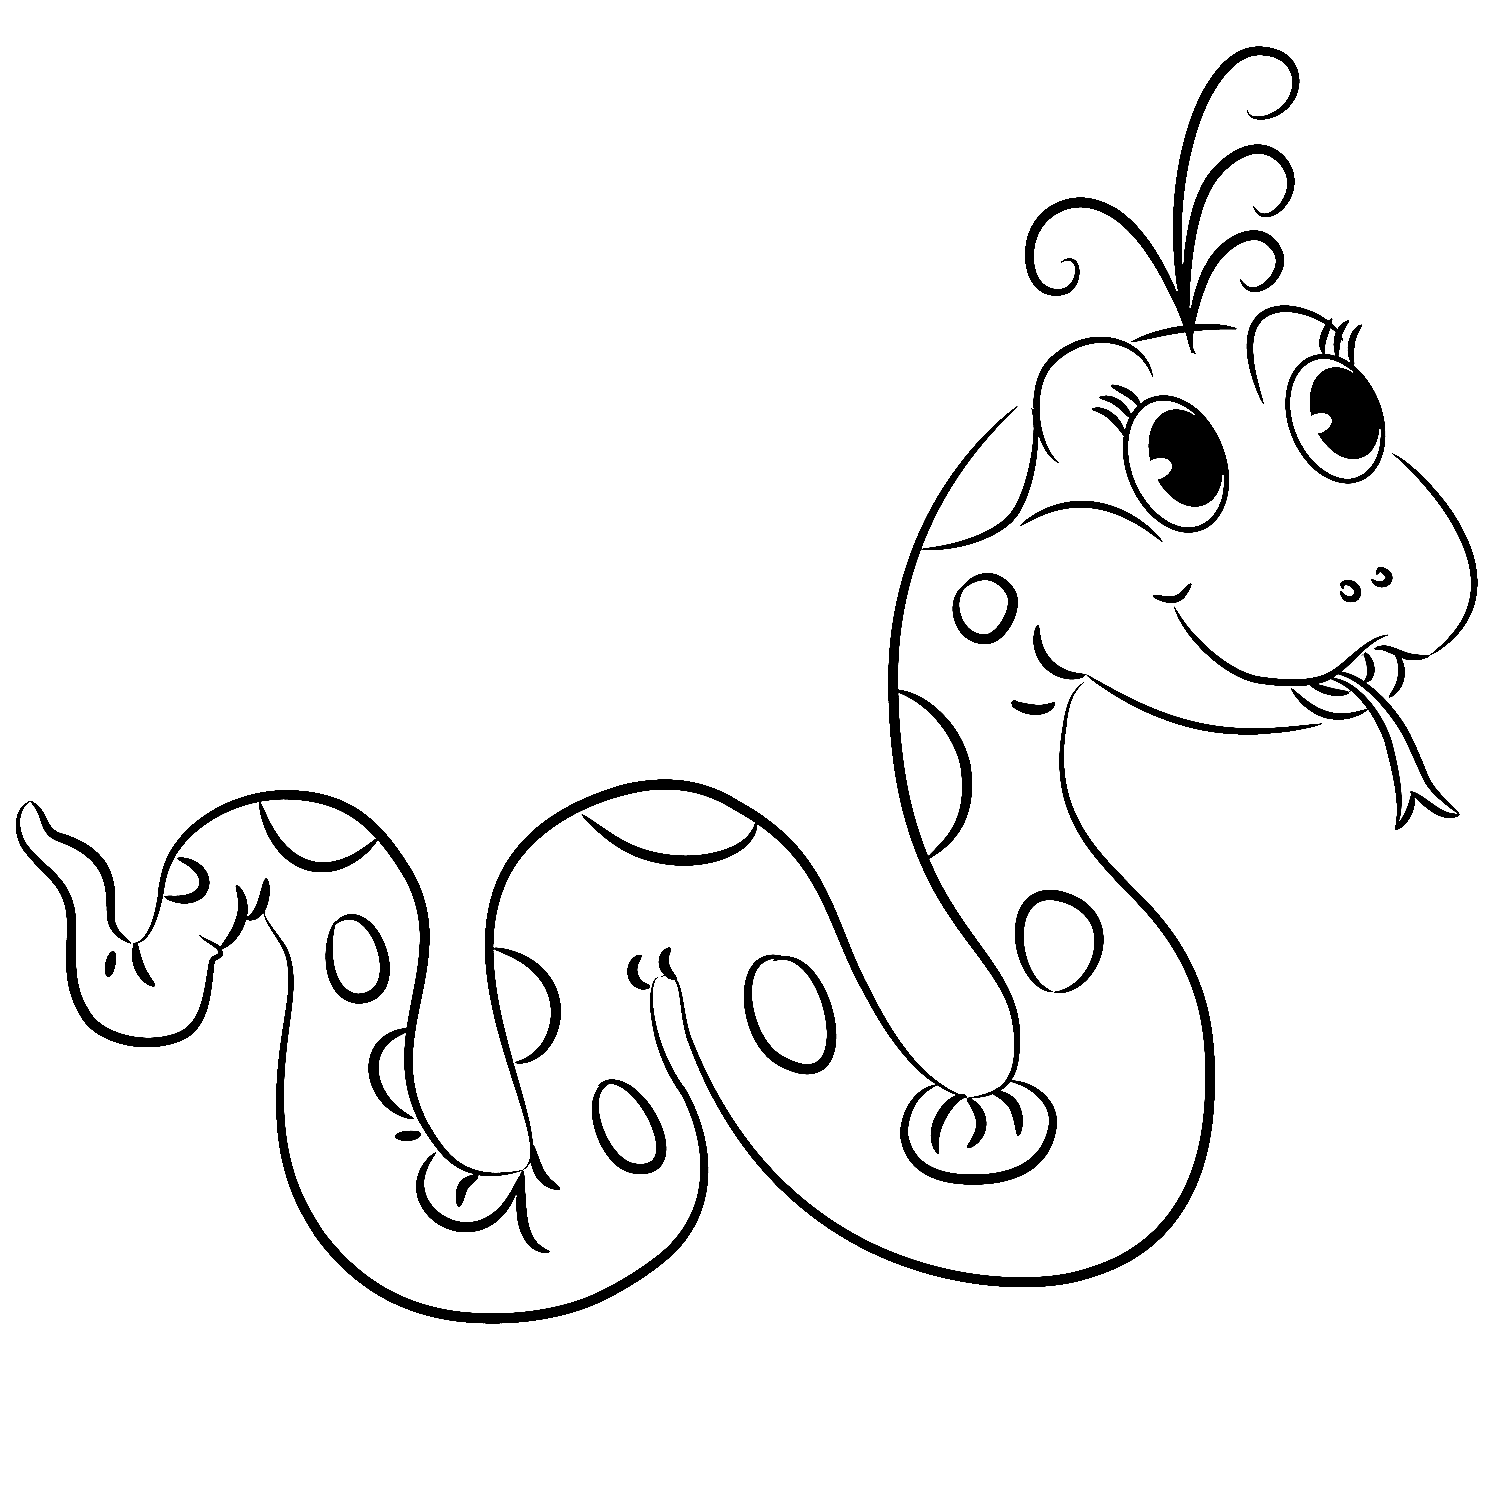 Snakes Coloring Pages Printable - Coloring Home